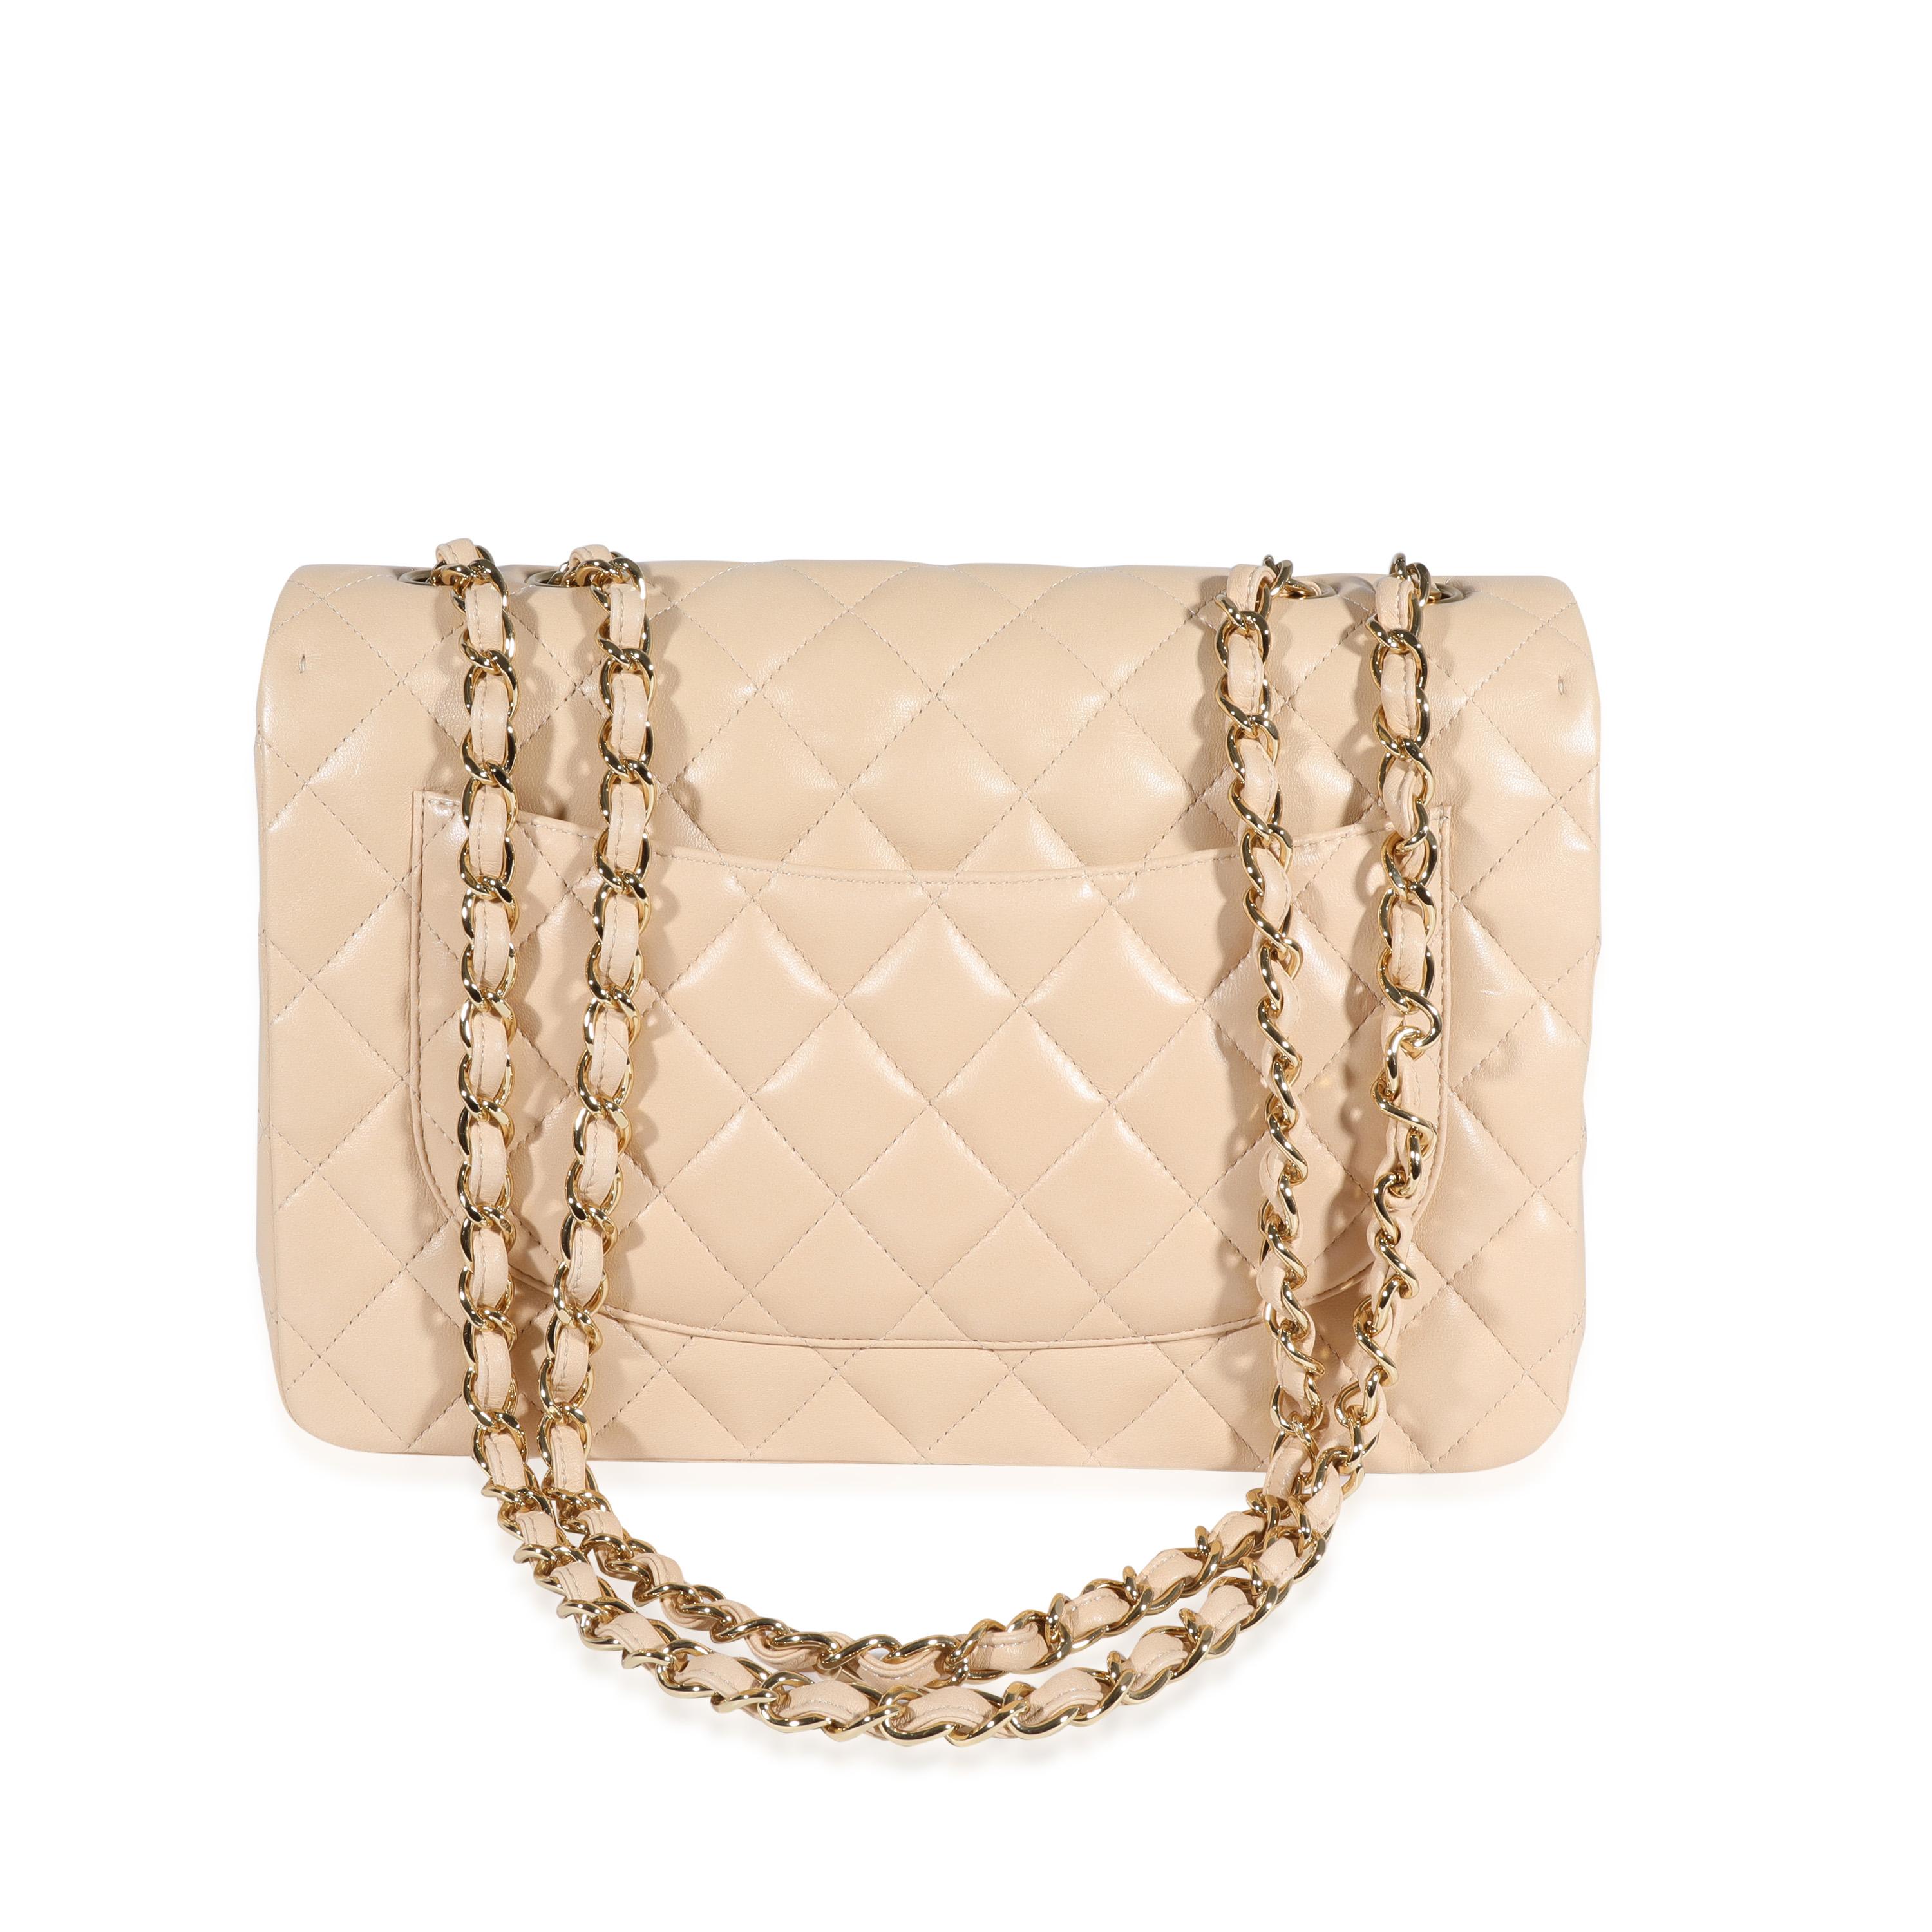 Listing Title: Chanel Beige Quilted Lambskin Jumbo Classic Single Flap Bag
SKU: 122119
MSRP: 9500.00
Condition: Pre-owned 
Handbag Condition: Very Good
Condition Comments: Faint scuffing at exterior. Light scratching at hardware. Scuffing at